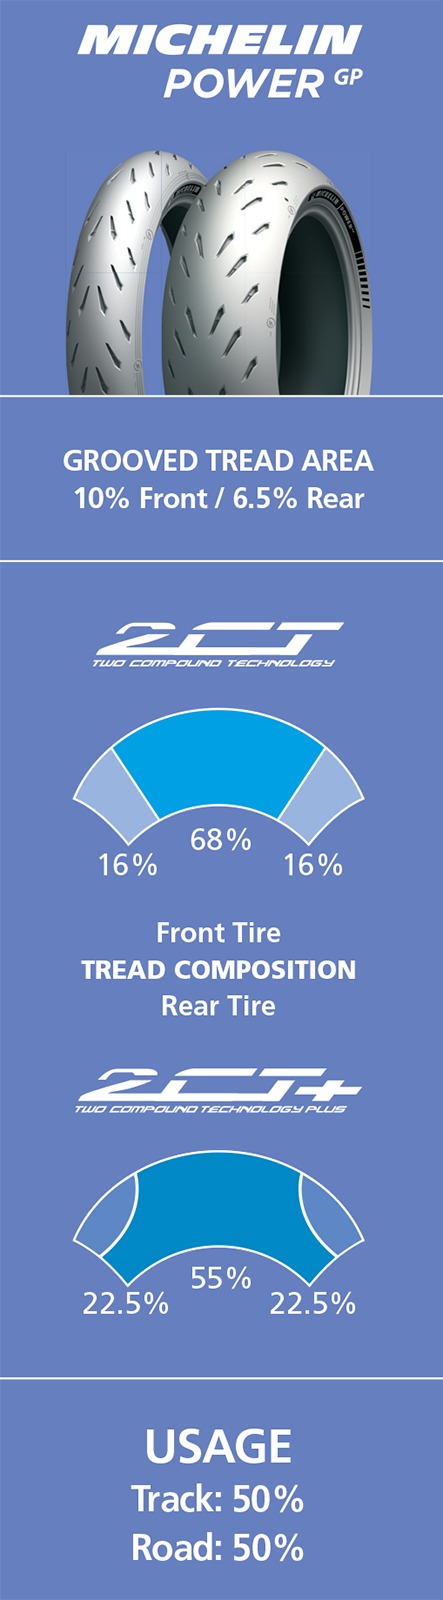 190/50ZR17 (73W) Power GP Rear Motorcycle Tire - Click Image to Close